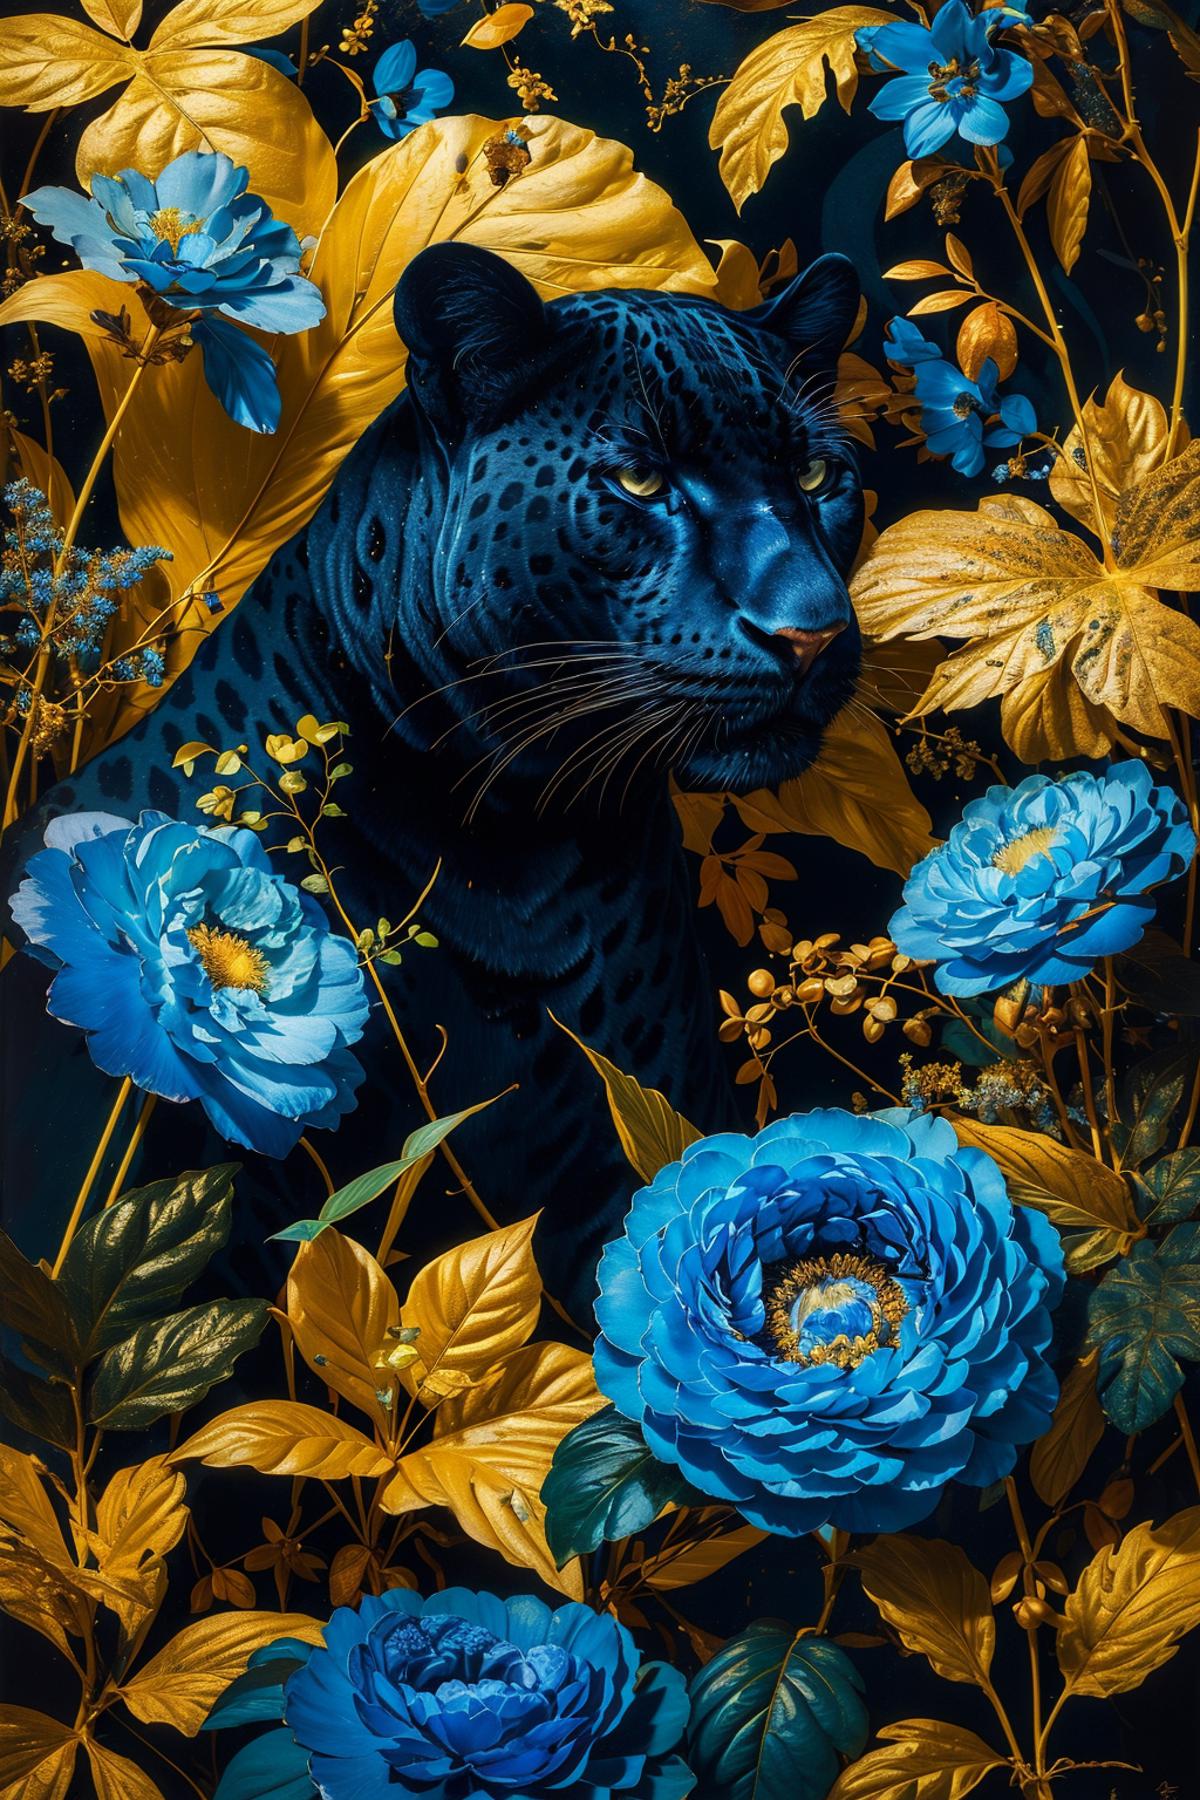 A large black tiger with yellow eyes is surrounded by vibrant blue and yellow flowers in a colorful and lush environment.